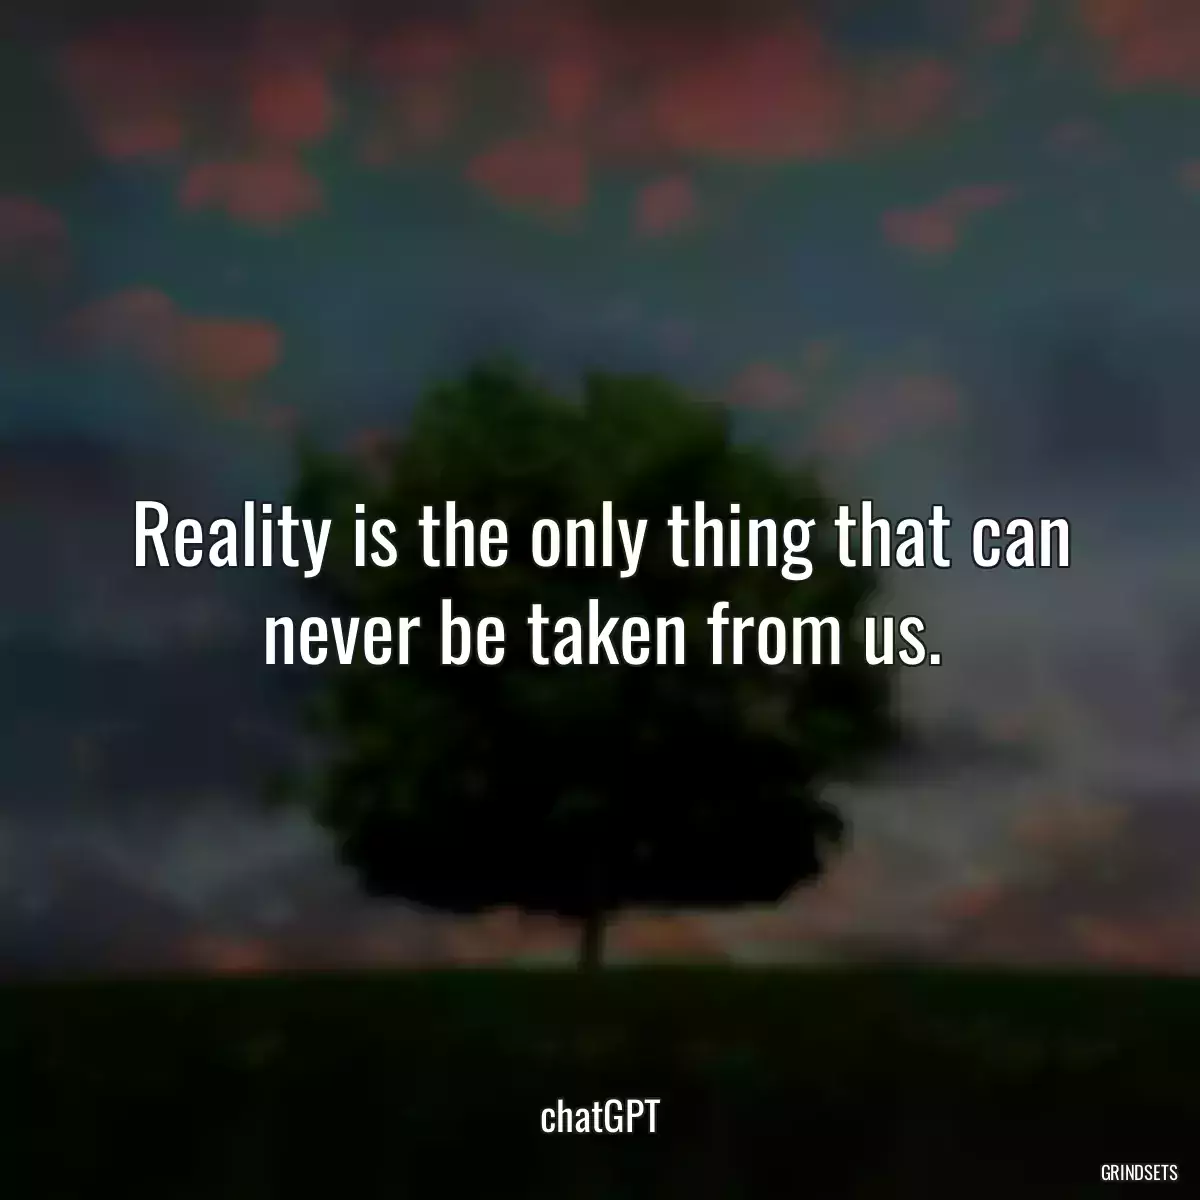 Reality is the only thing that can never be taken from us.